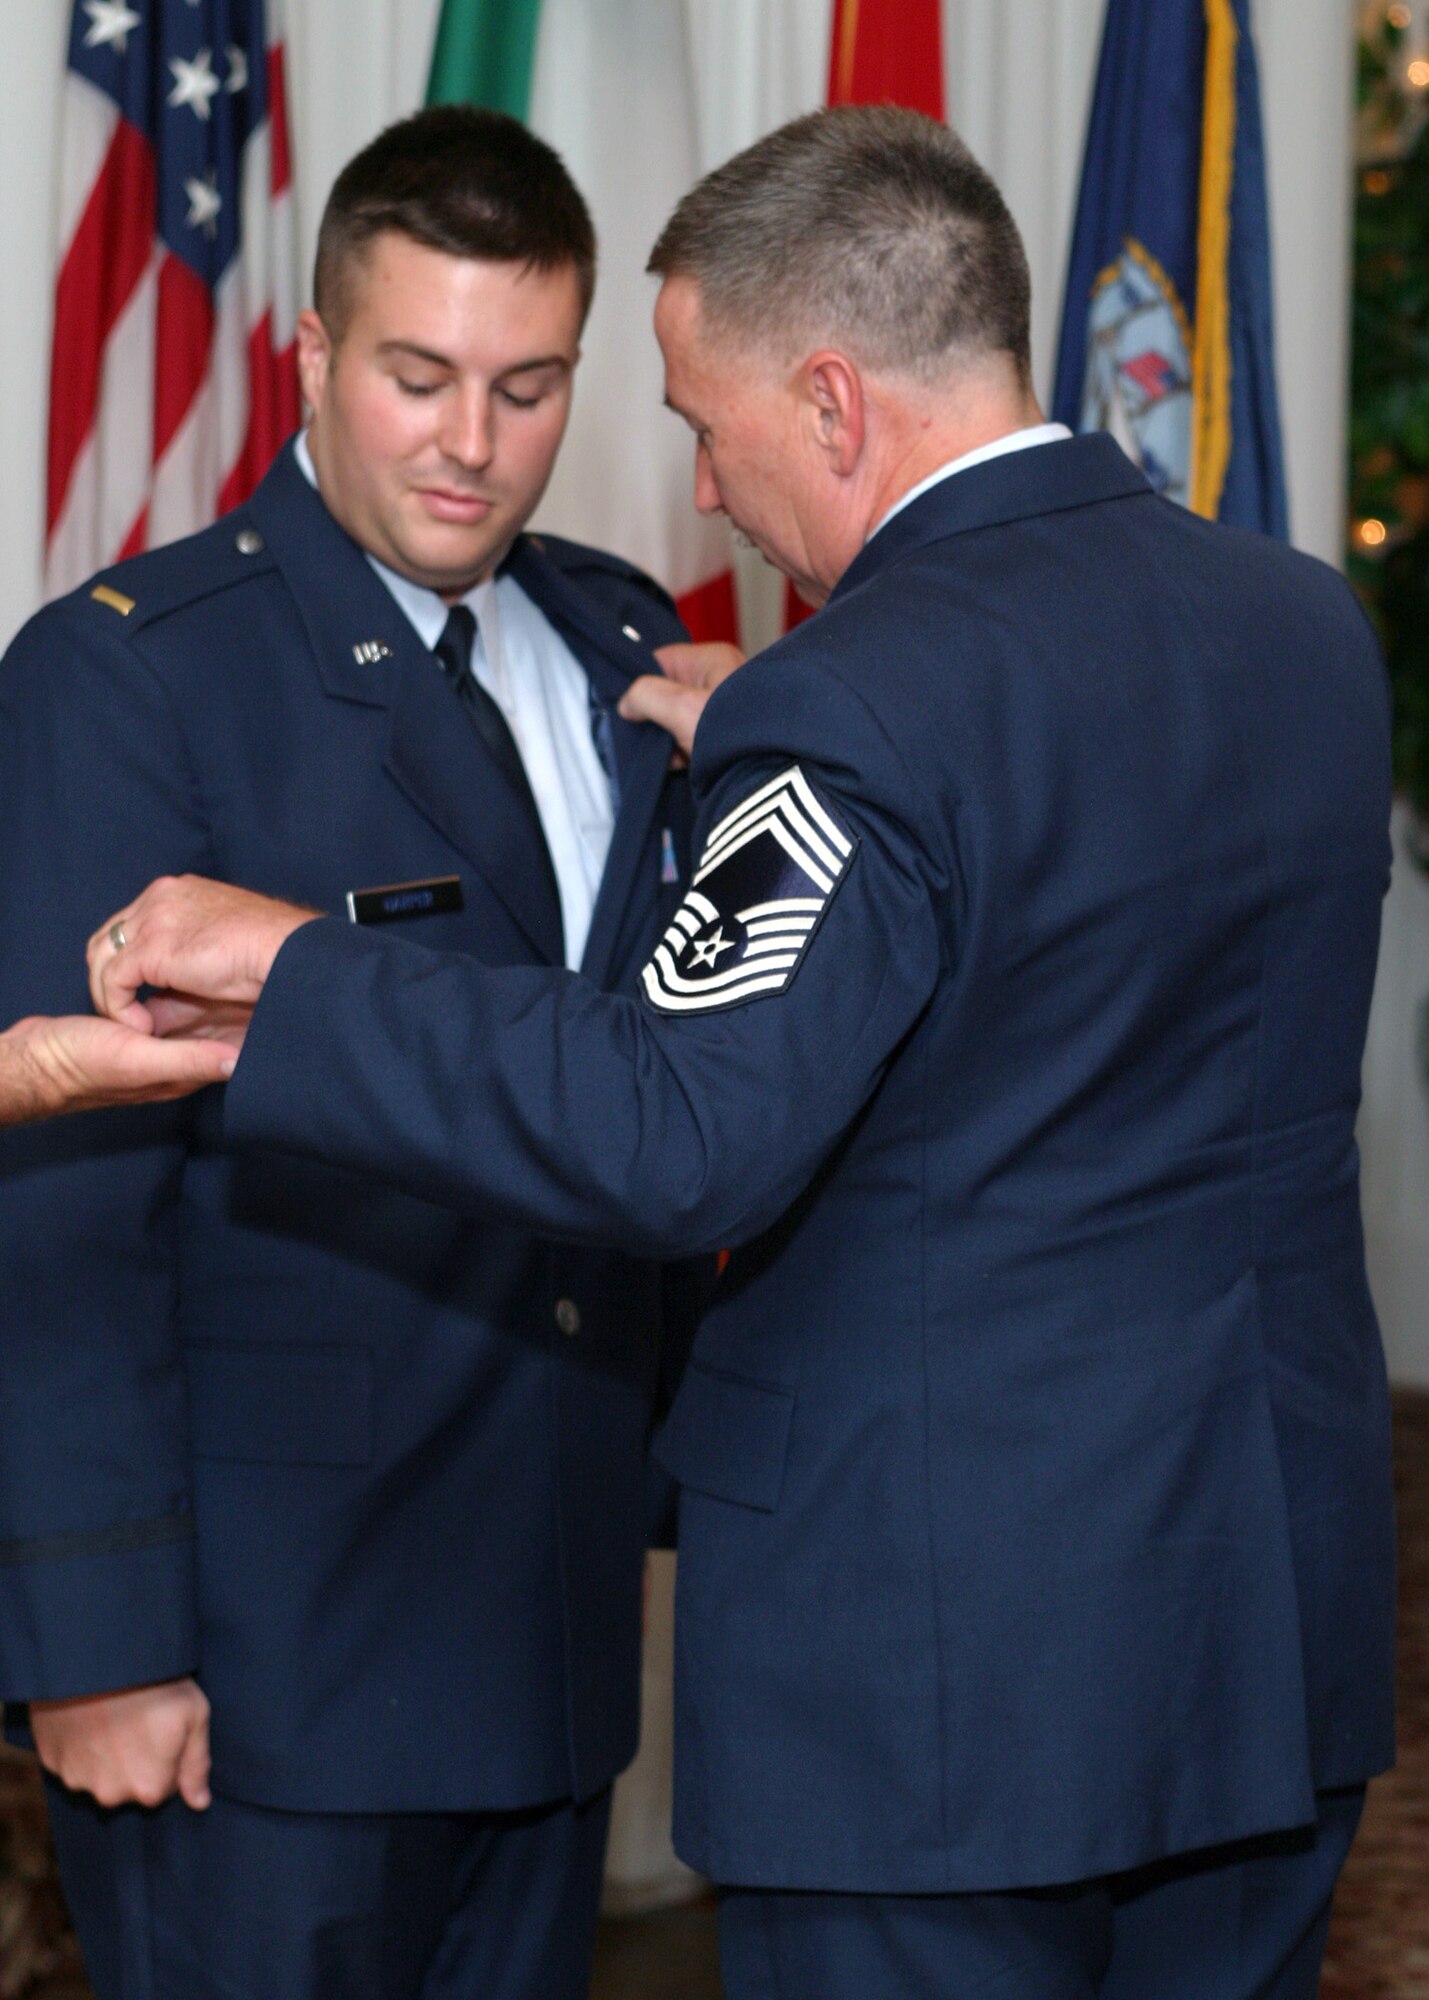 SOUTHWEST ASIA – Chief Master Sgt. Michael E. Harper pins on aviator wings on his son, then 2nd Lt. Michael J. Harper, during his son’s graduation from pilot training in Sept. 2006. Capt. Harper and his father are currently deployed together with the 746th Expeditionary Airlift Squadron. His son was later able to return the favor to his father by presiding over his last reenlistment. Both Airmen are Reservists deployed from the 908th Airlift Wing at Maxwell Air Force Base Ala. (Courtesy photo)